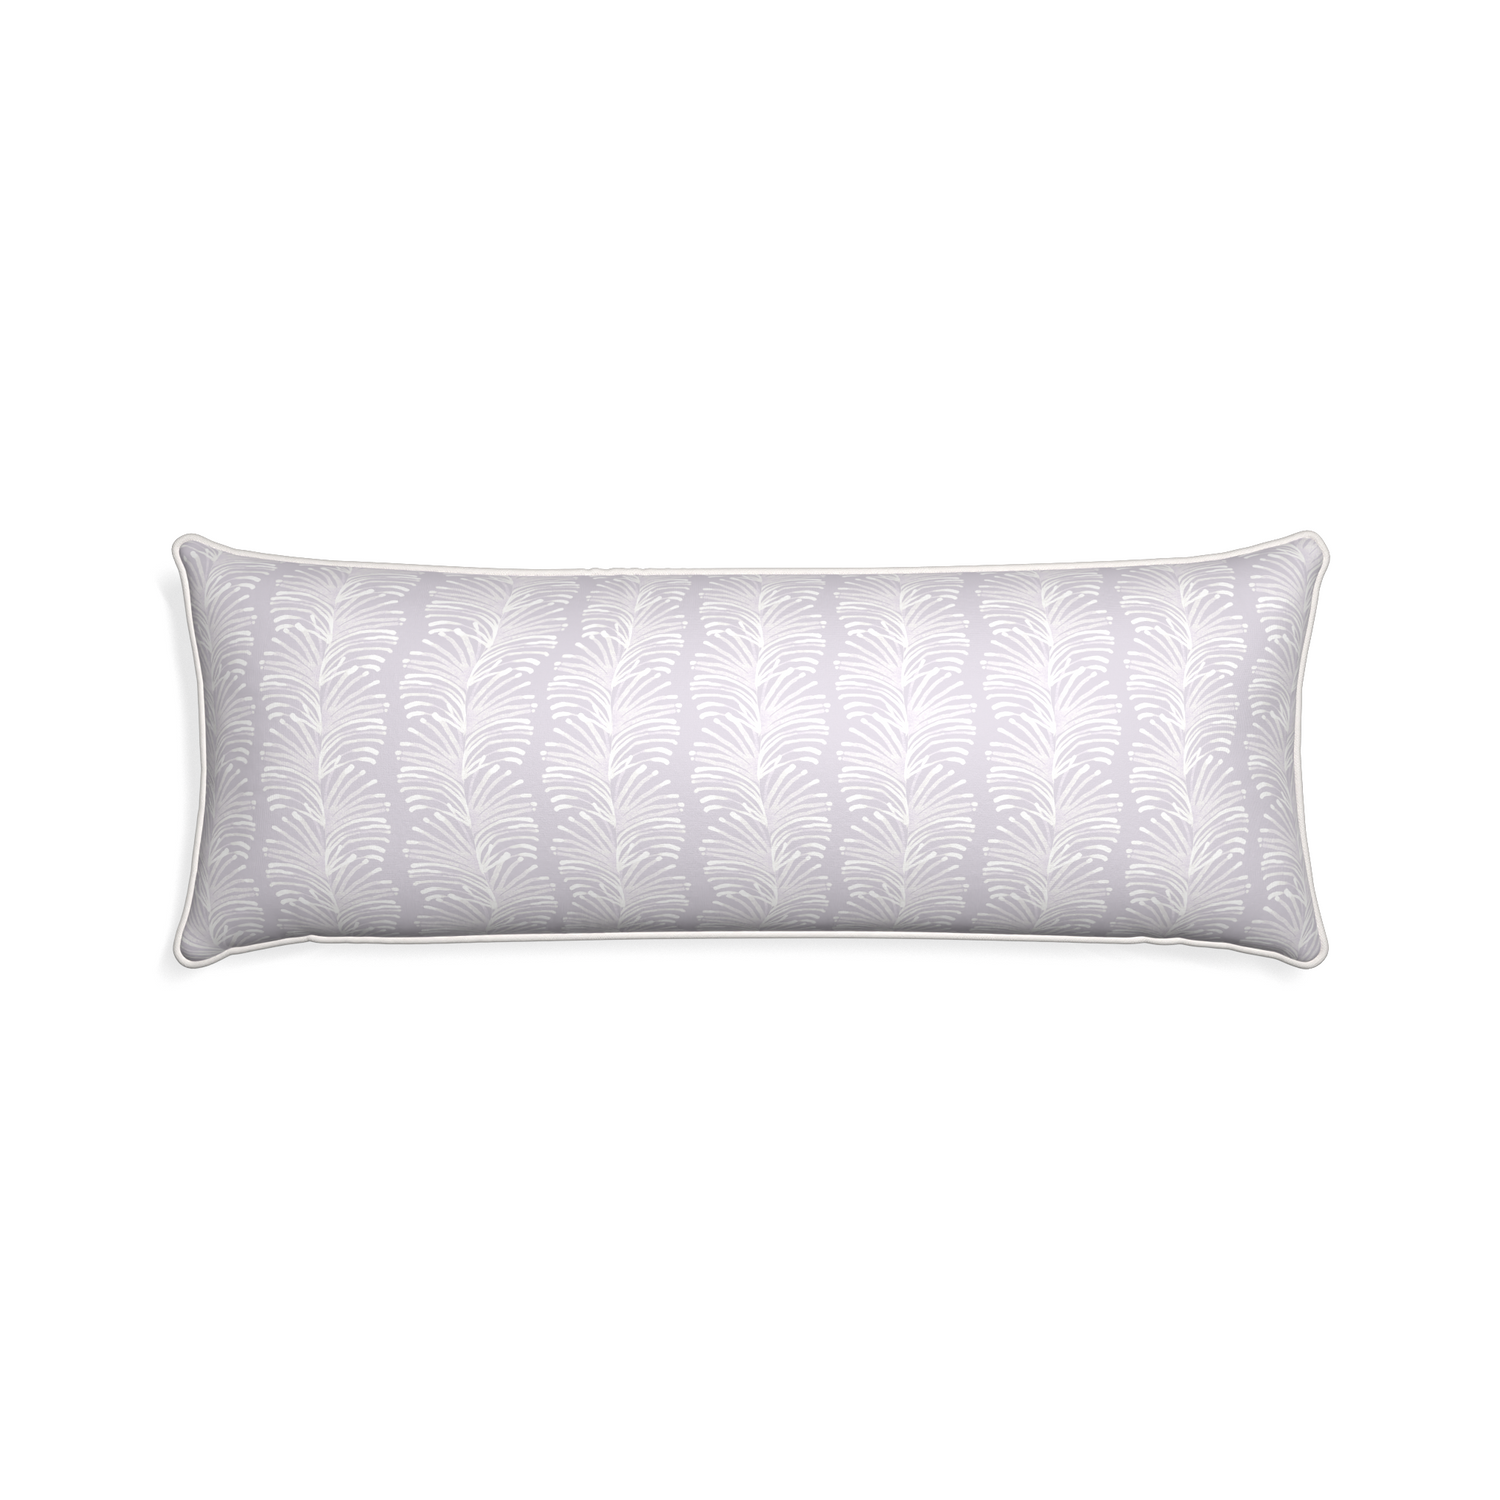 Xl-lumbar emma lavender custom lavender botanical stripepillow with snow piping on white background